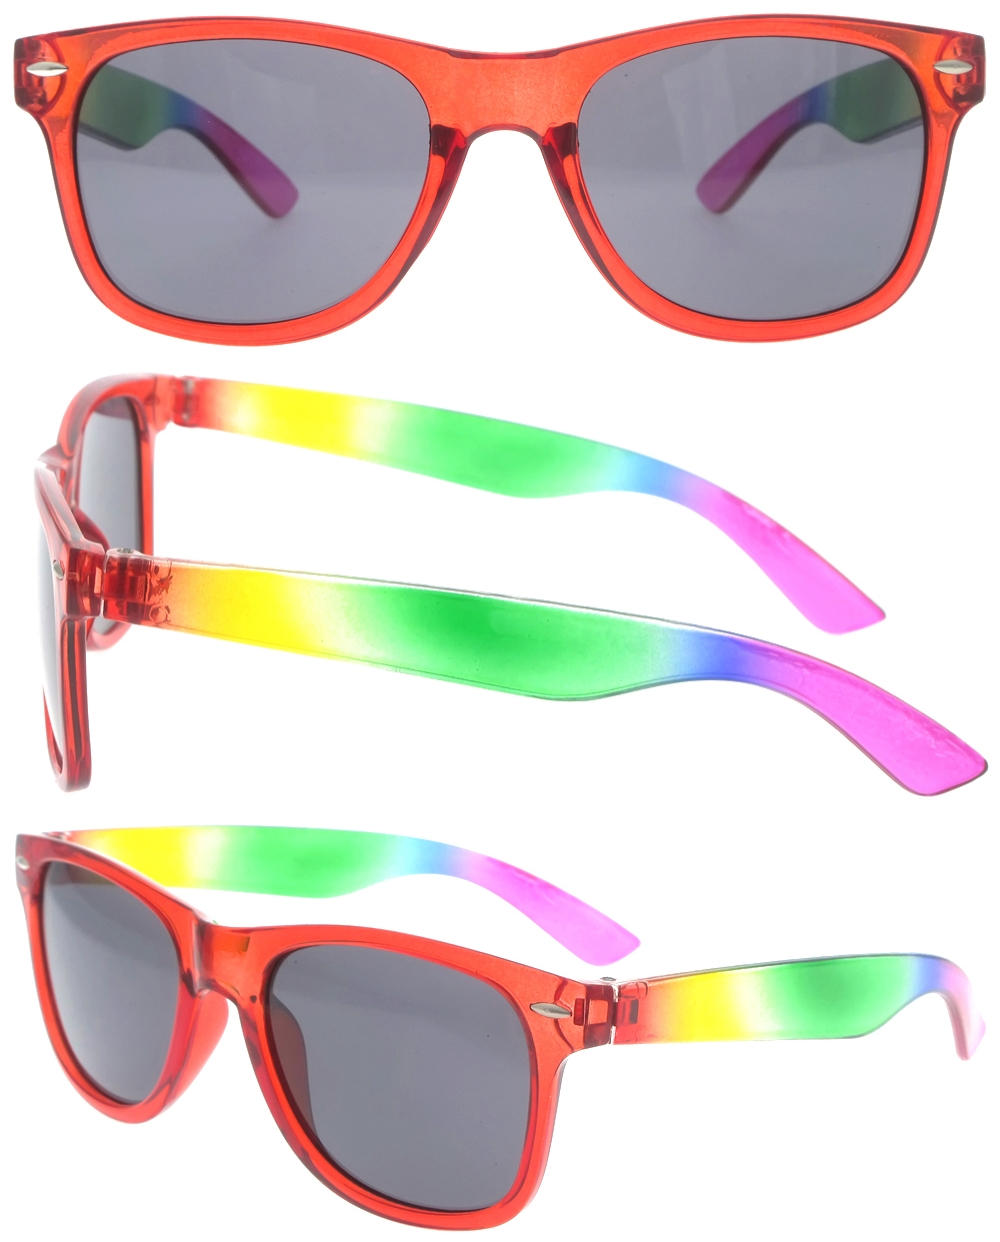 Dachuan Optical DSP348002 China Supplier Classic Design Plastic Sunglasses With Colorful Frame (1)